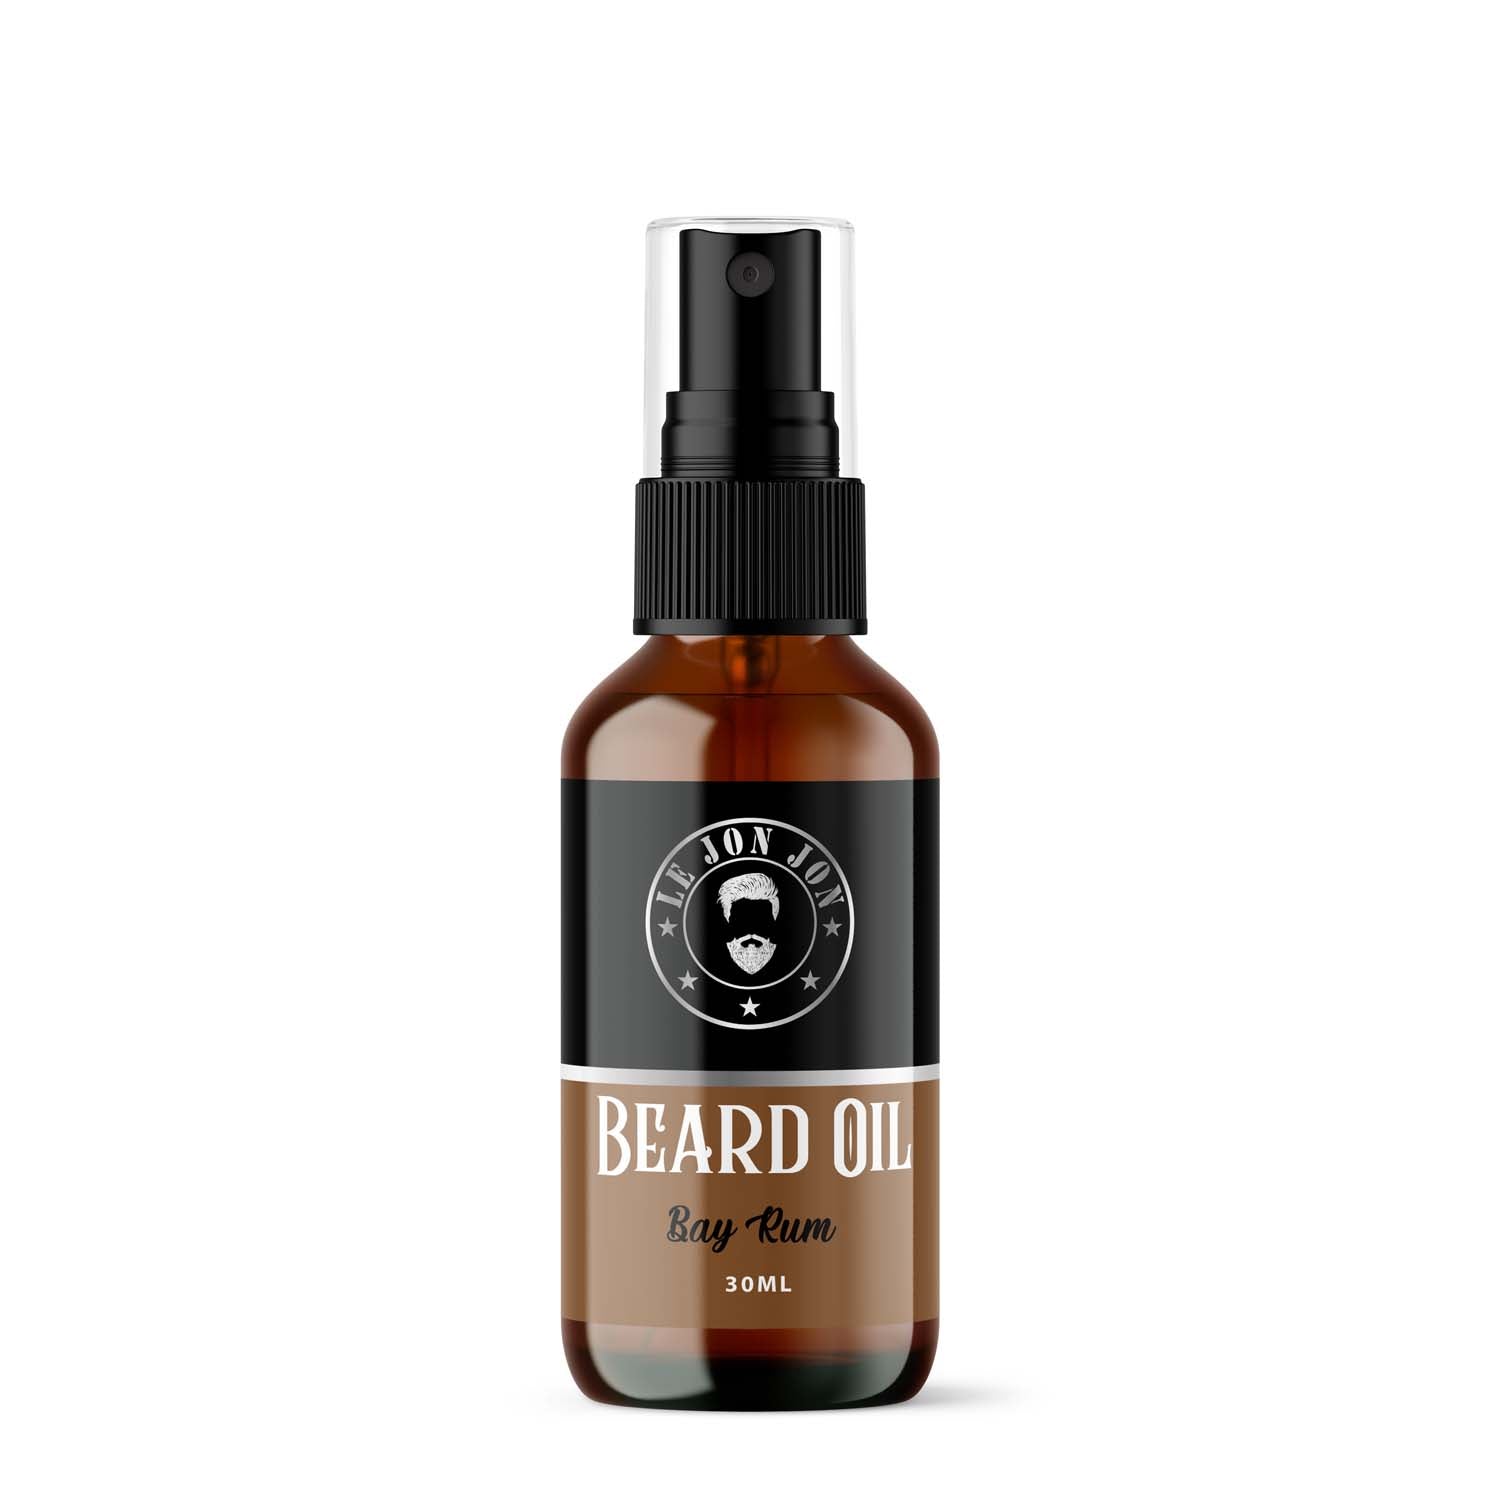 Beard oil collection page